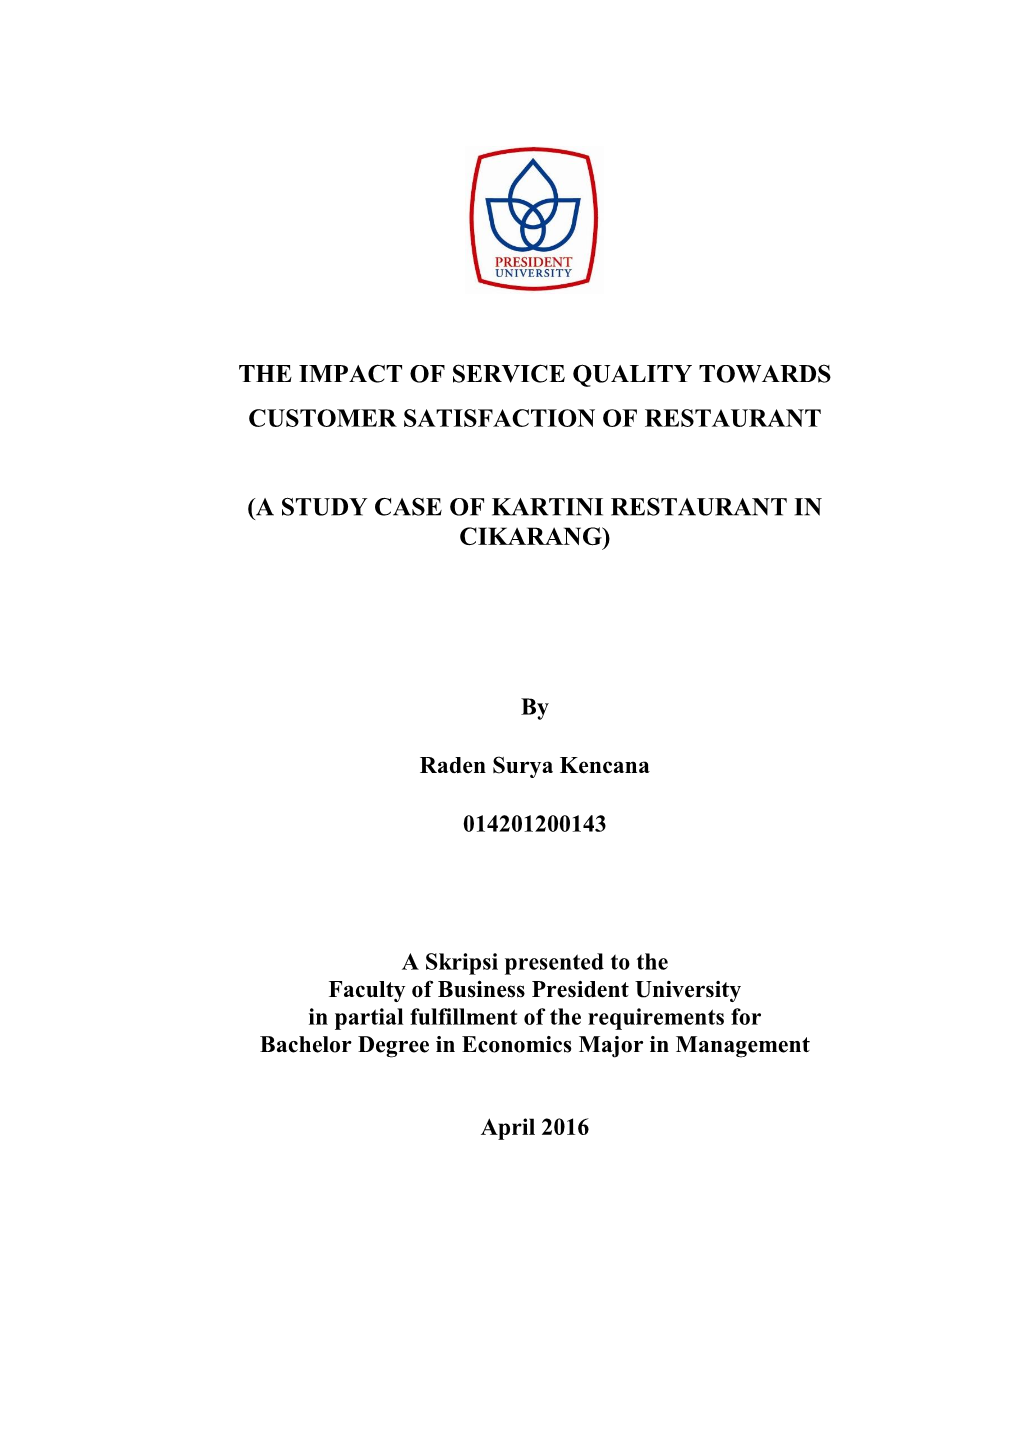 The Impact of Service Quality Towards Customer Satisfaction of Restaurant